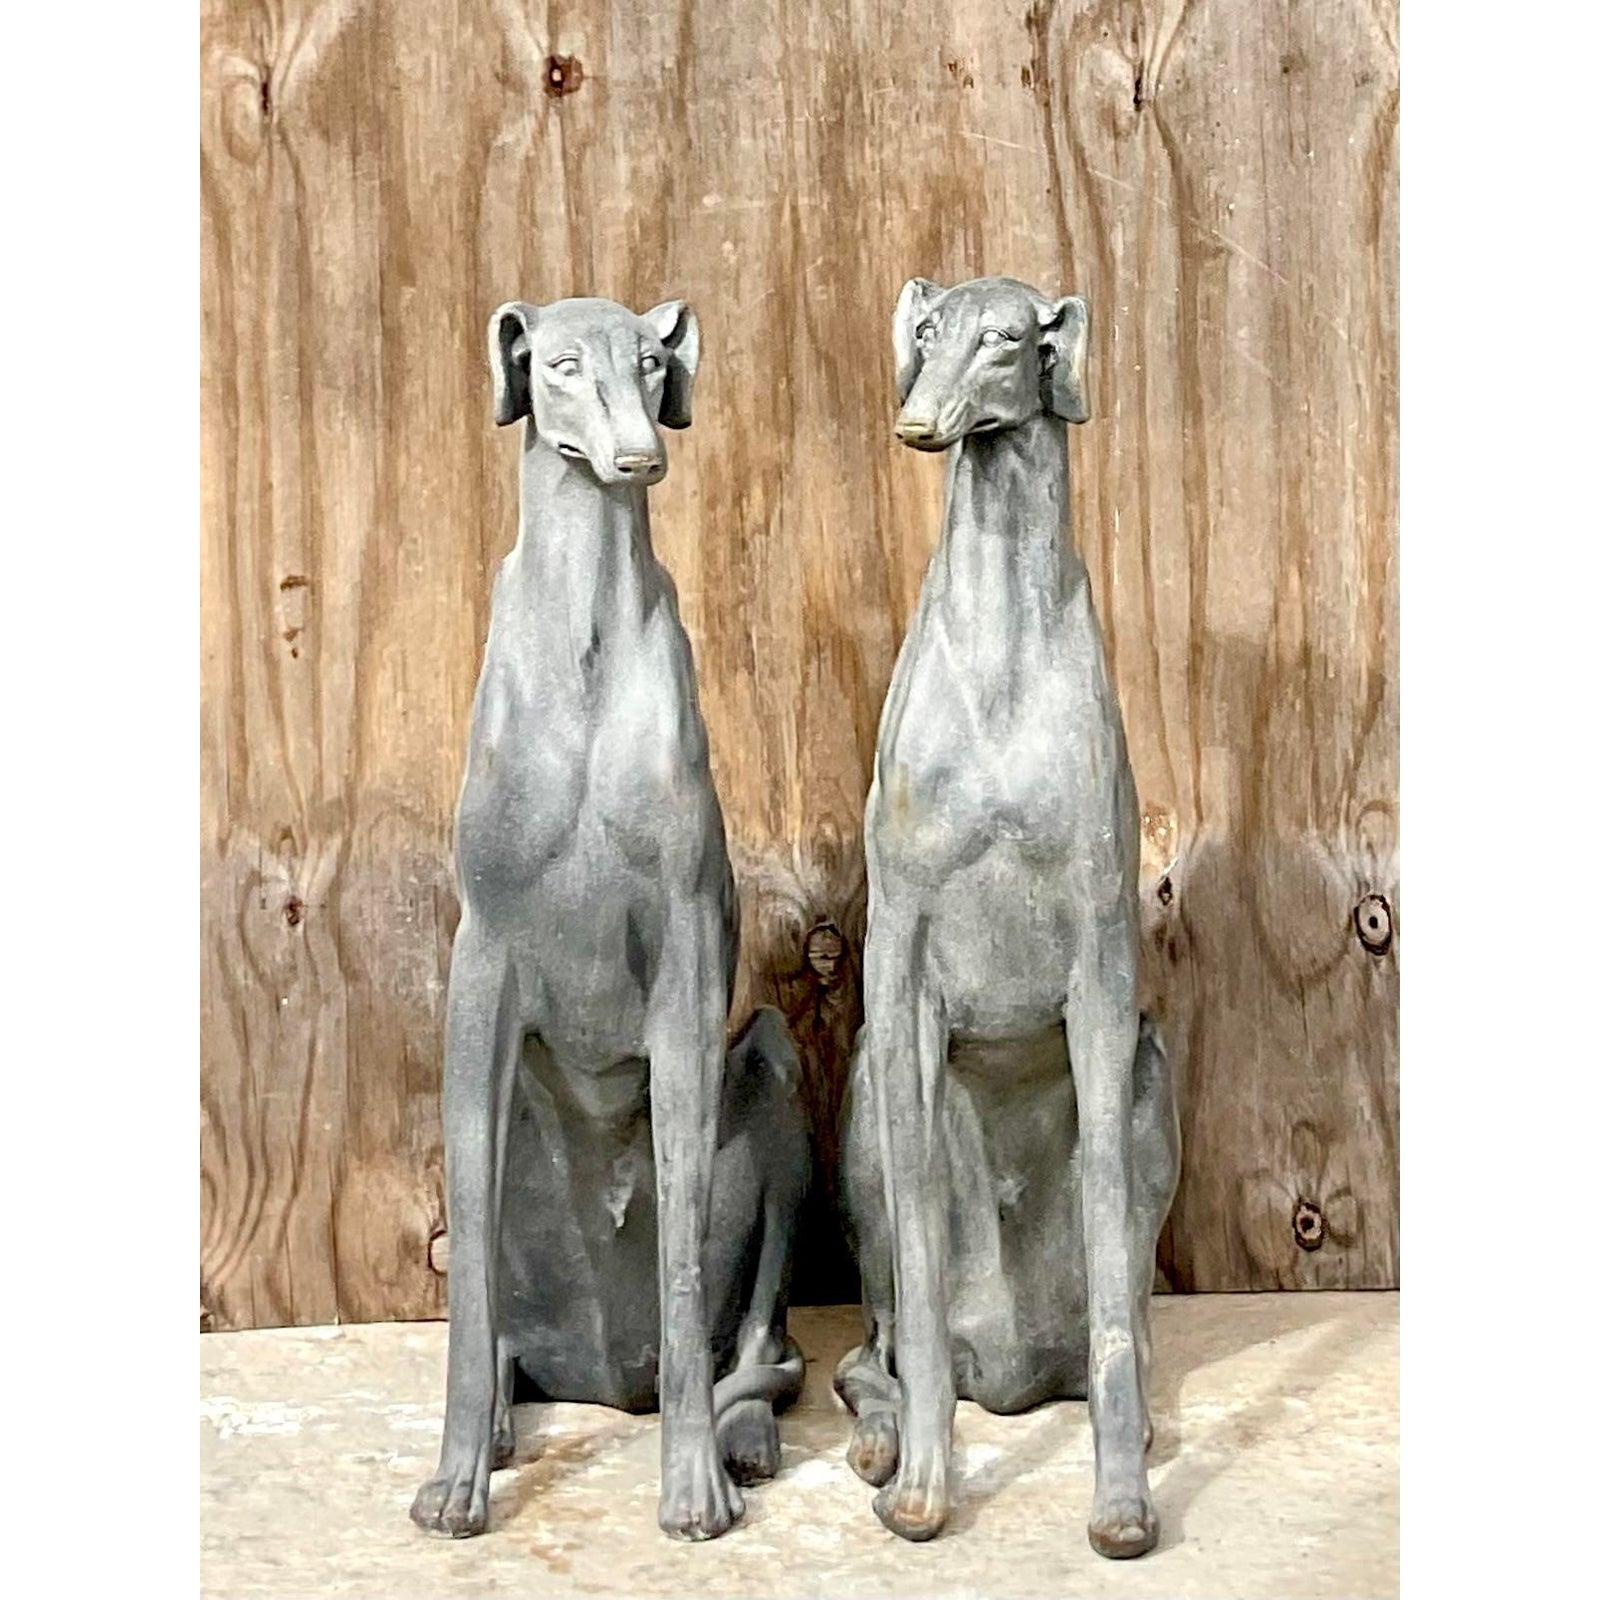 Fantastic pair of vintage Regency dogs. Slender and regal pair of Greyhounds with a chic charcoal finish. Tiny flashes of metallic peeking through. Made from a cast ceramic with a textured matte finish. Acquired from a Palm Beach estate.